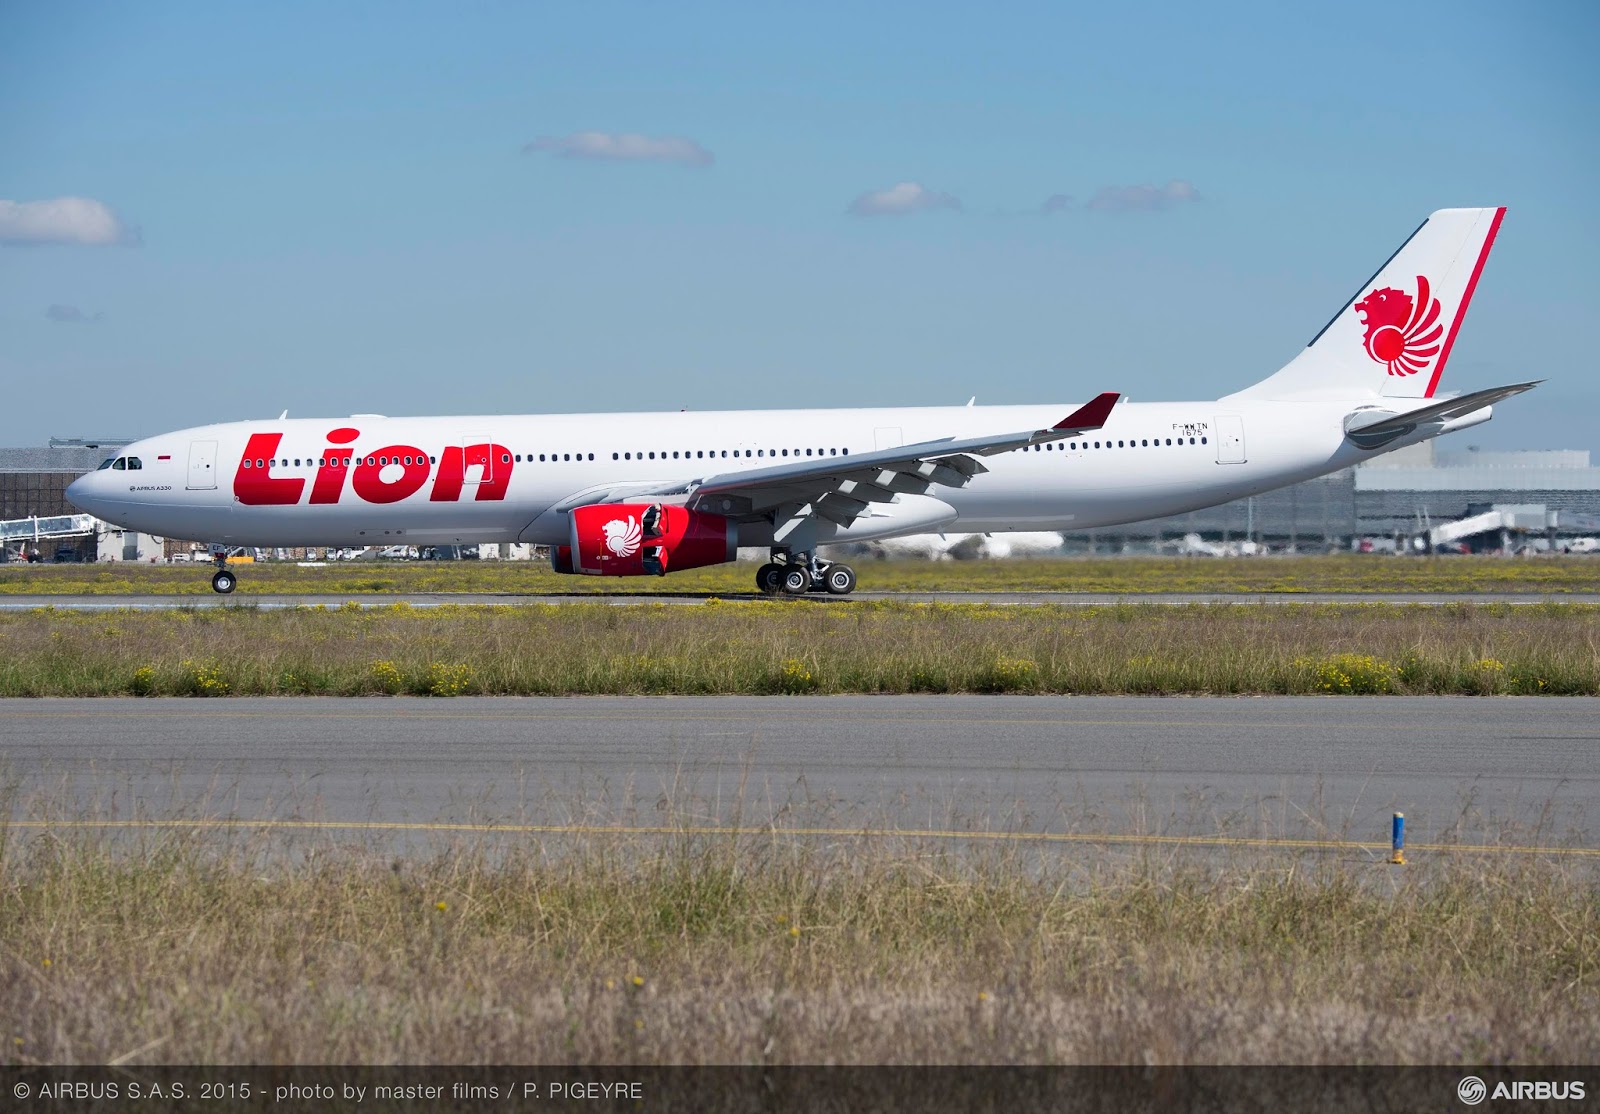 Flyingphotos Magazine News Lion Air takes delivery of its